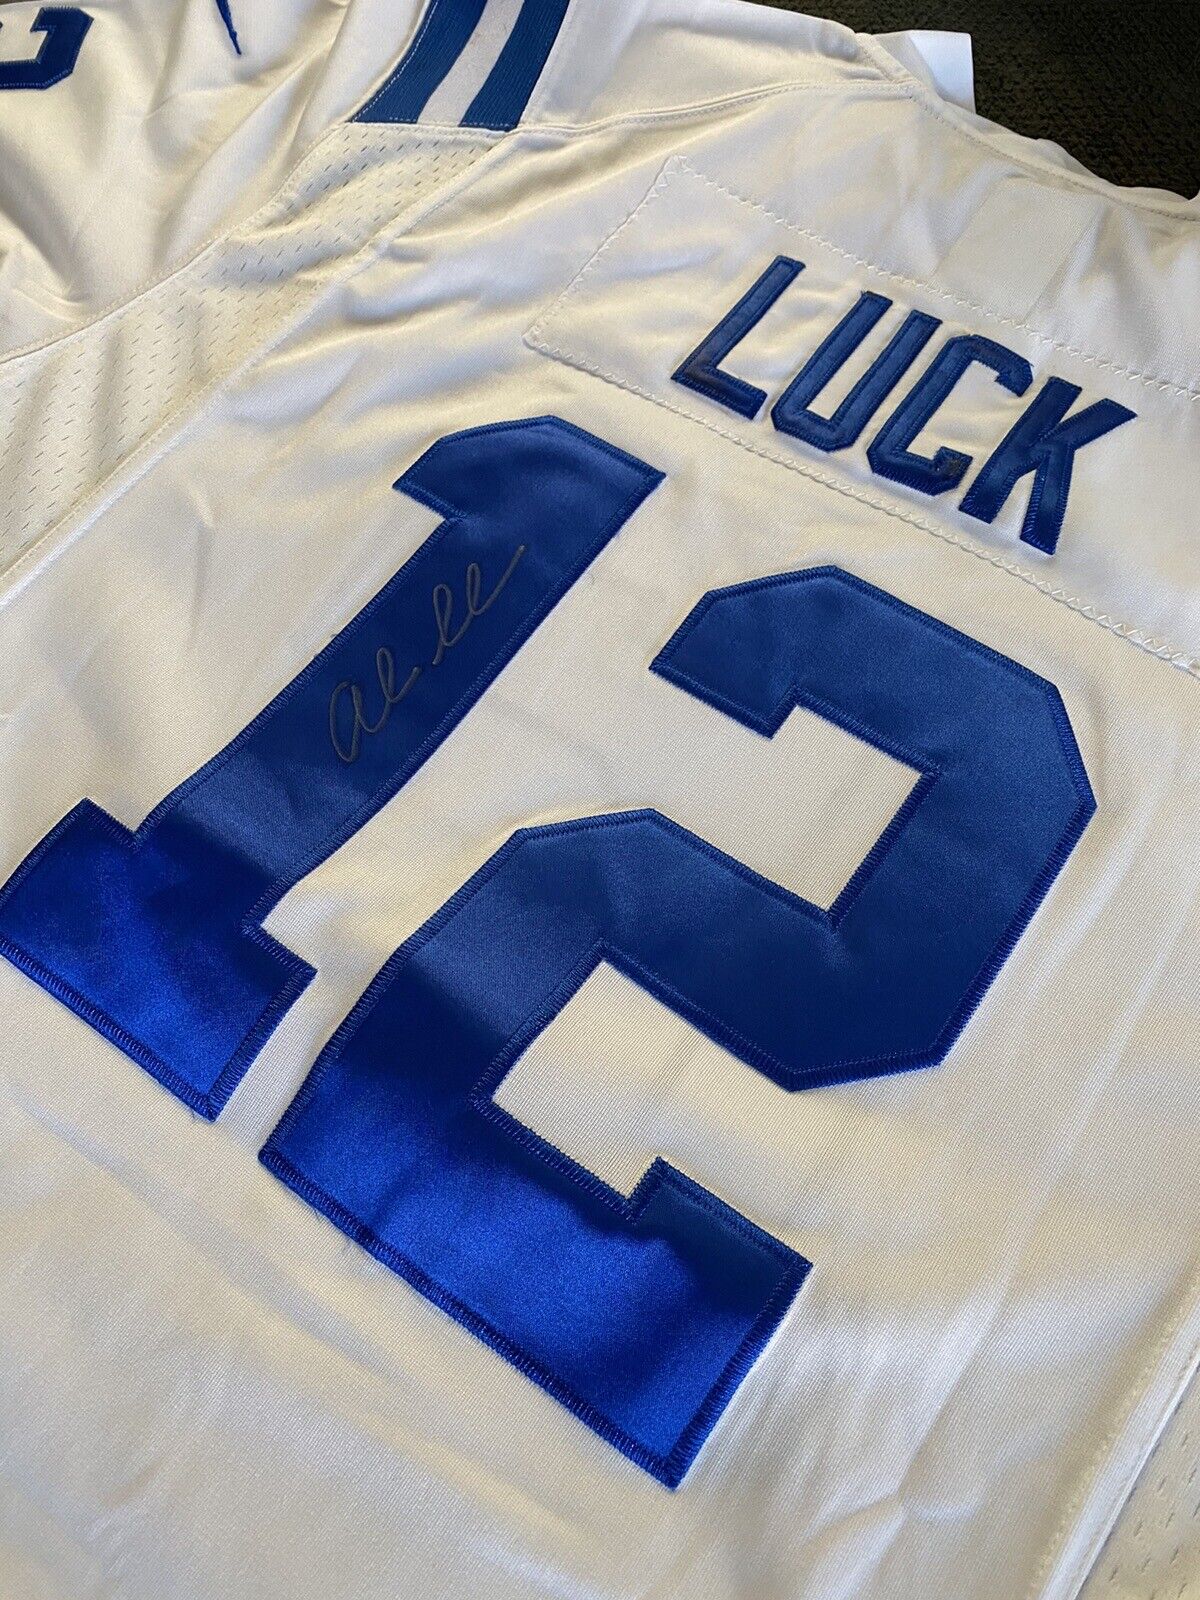 Andrew Luck Signed NFL White Colts Nike Jersey